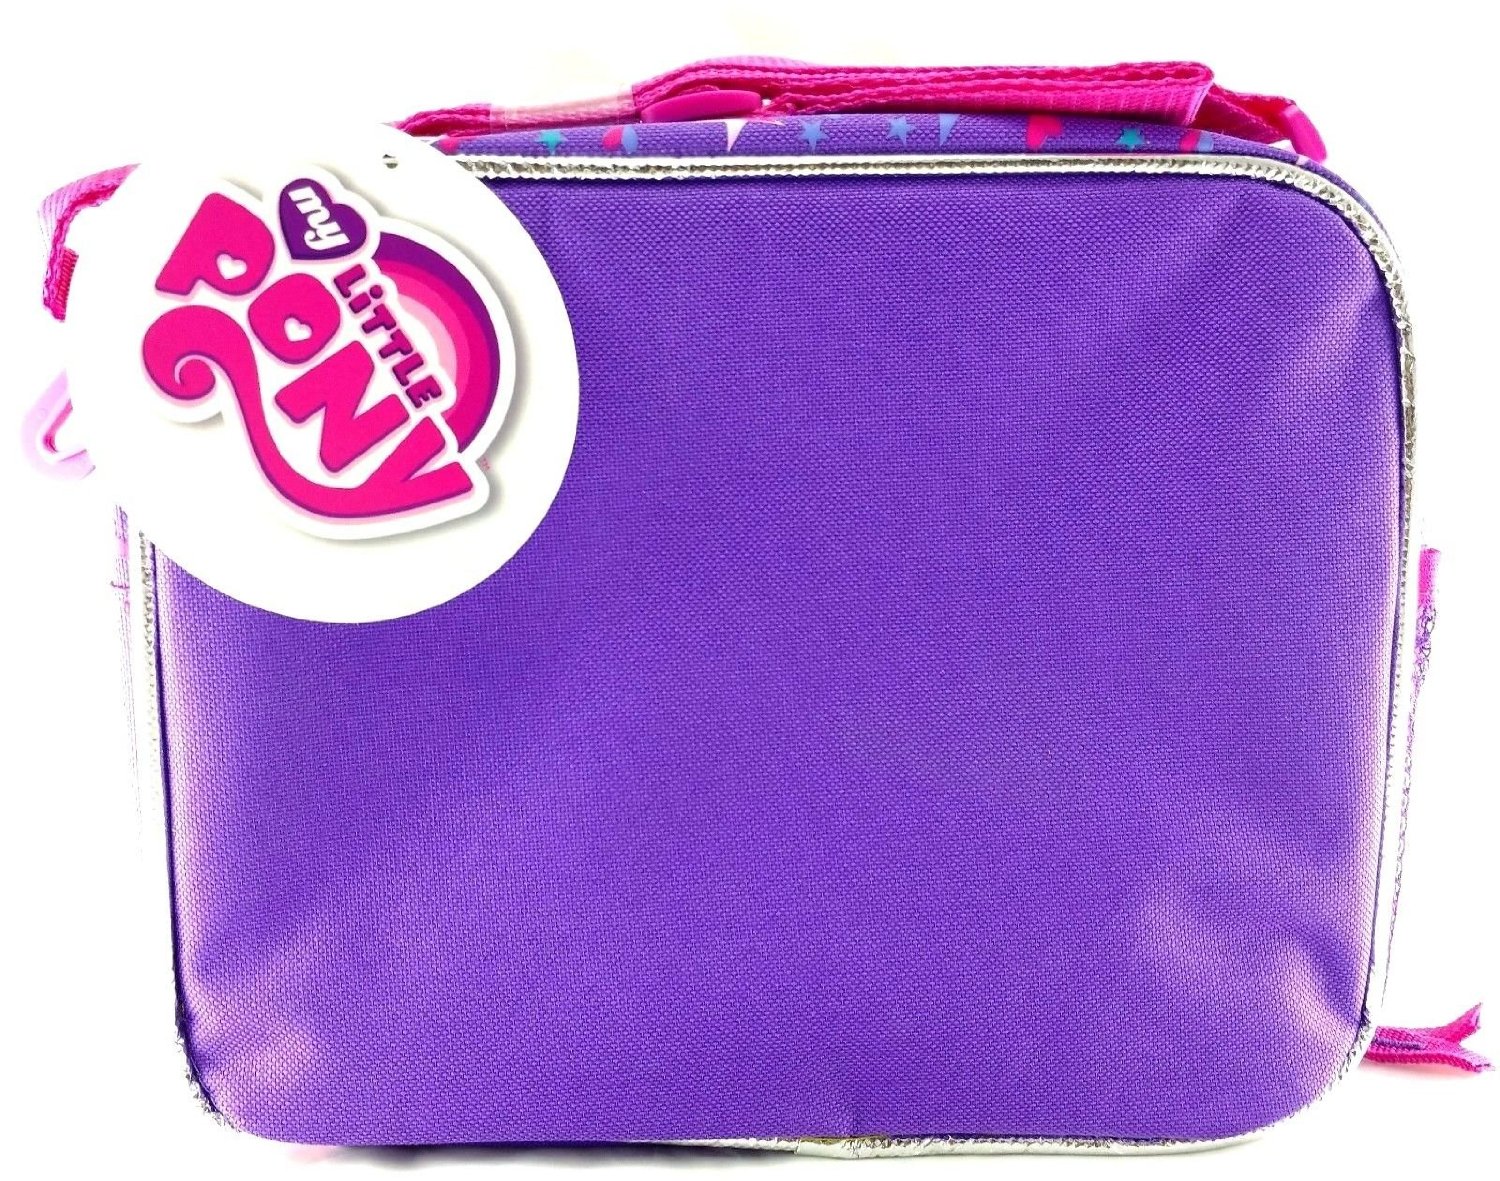 My Little Pony Kids Lunch Box Bag for Girls Unicorn Lunchbox Movie Cartoons Soft - image 2 of 2